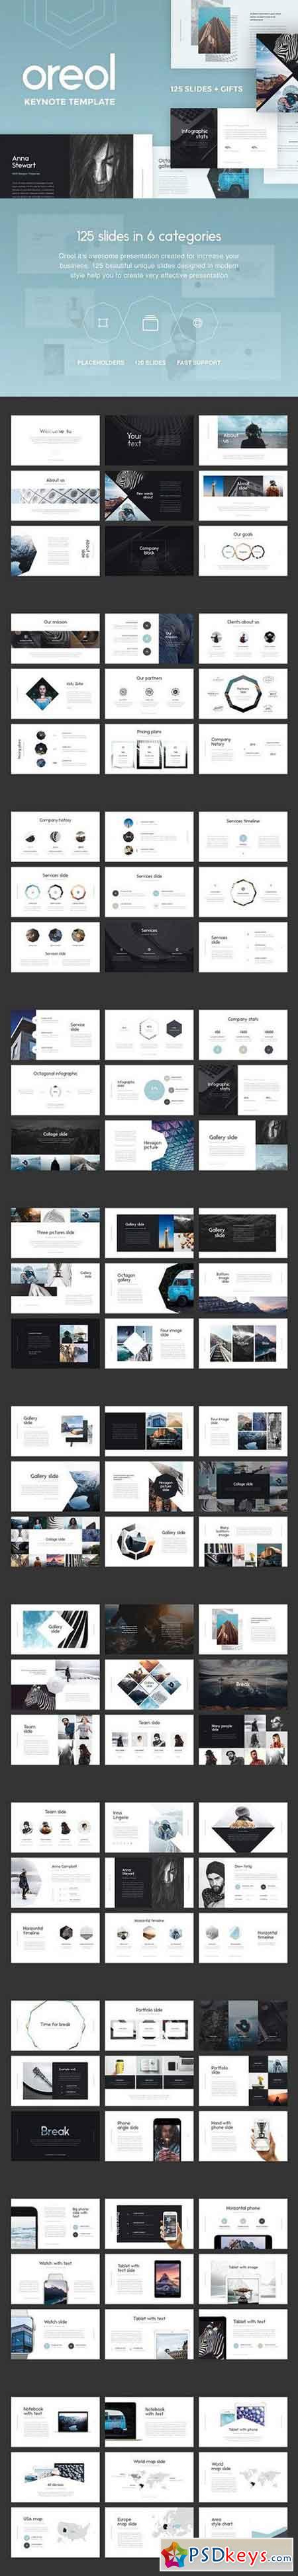 Oreol Keynote Template + GIFTS 1353511